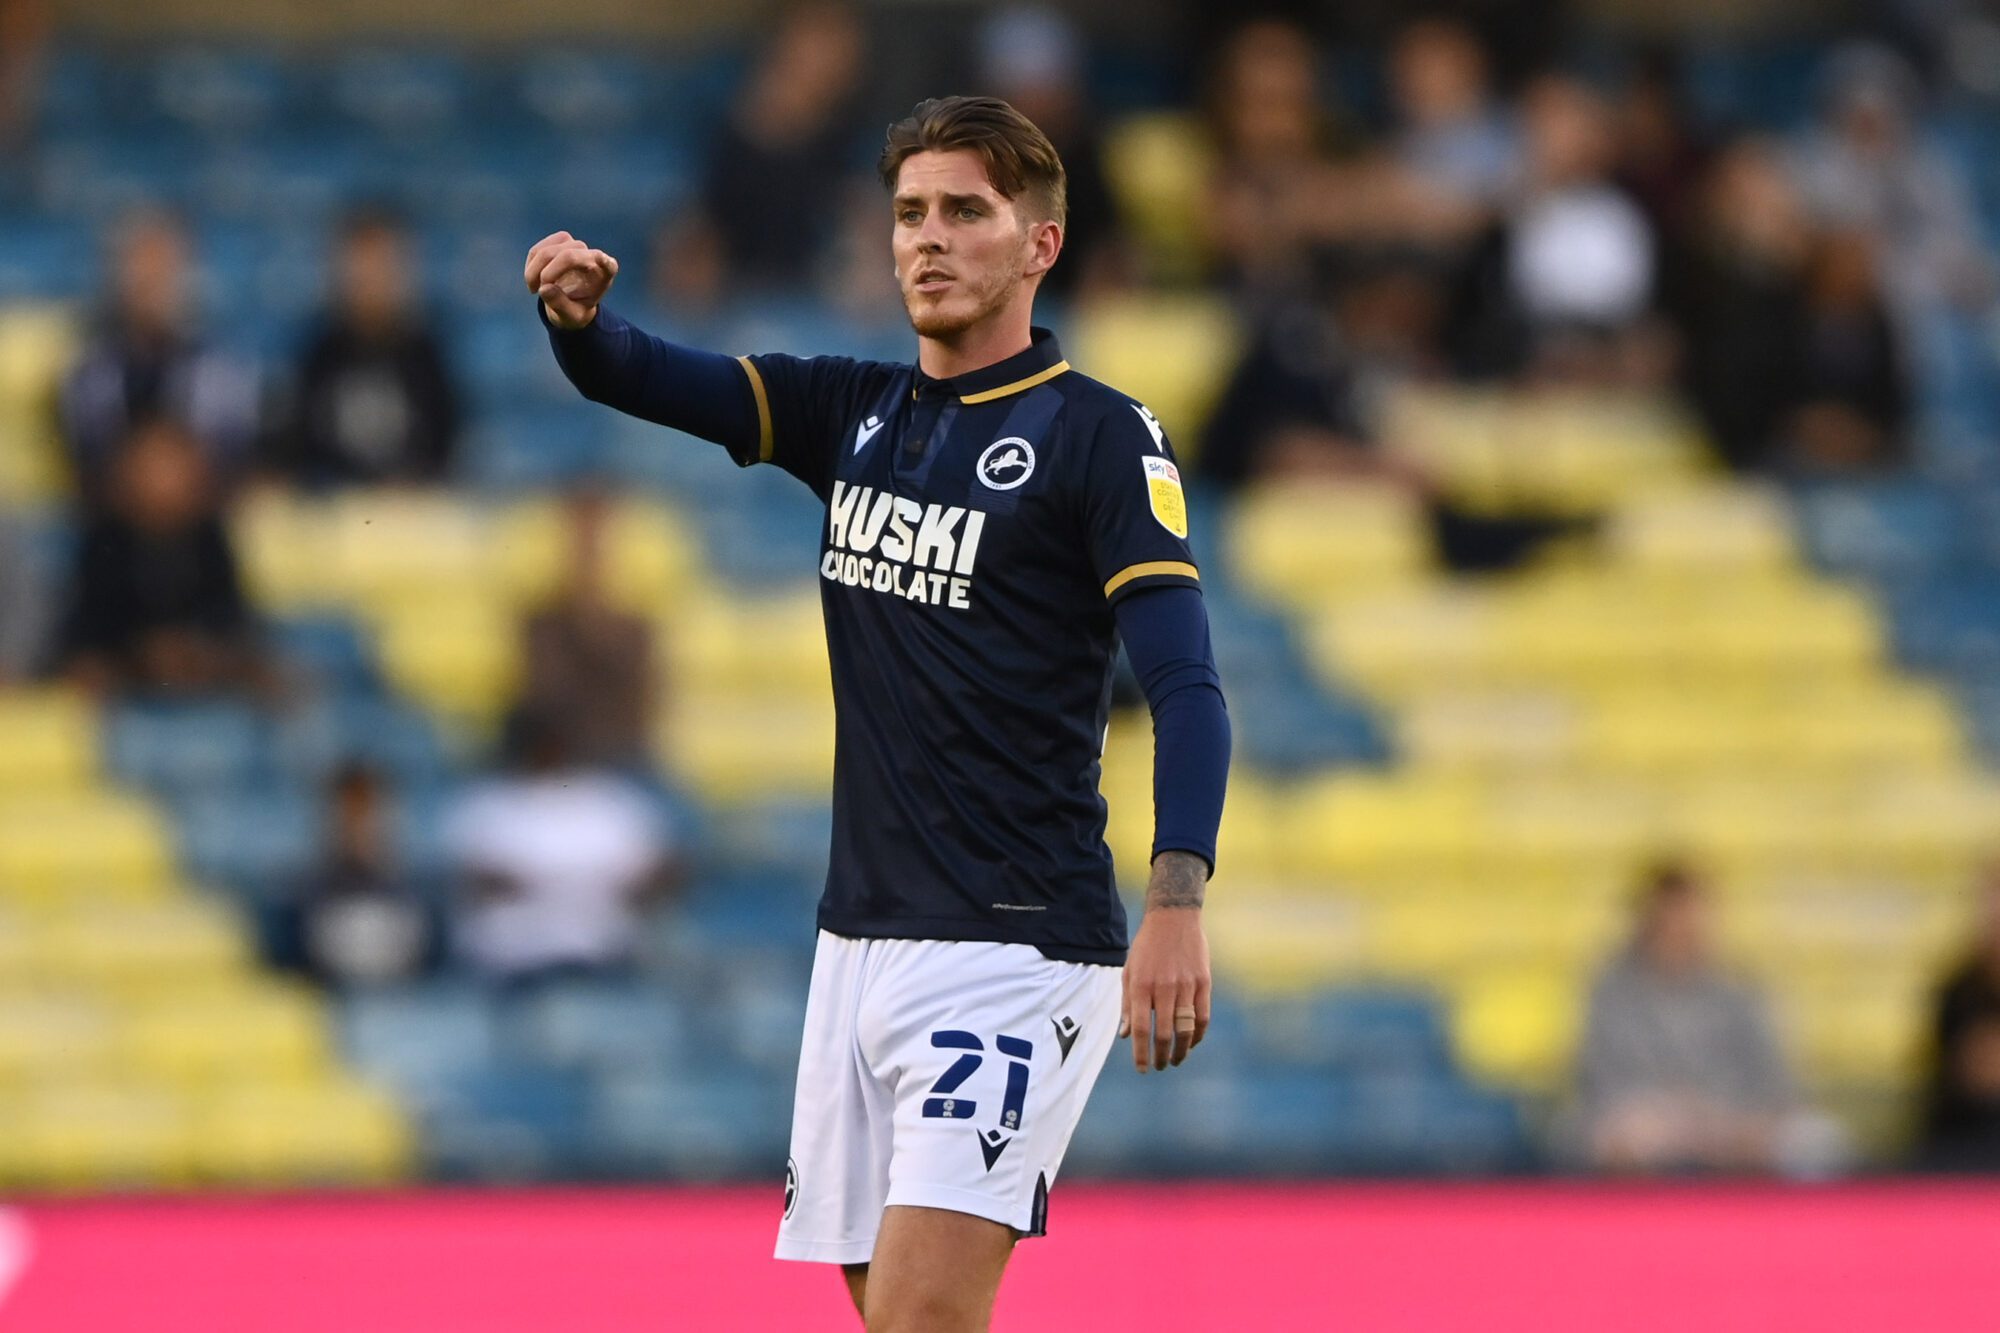 Released Millwall man lands Championship lifeline at Huddersfield Town – South London News